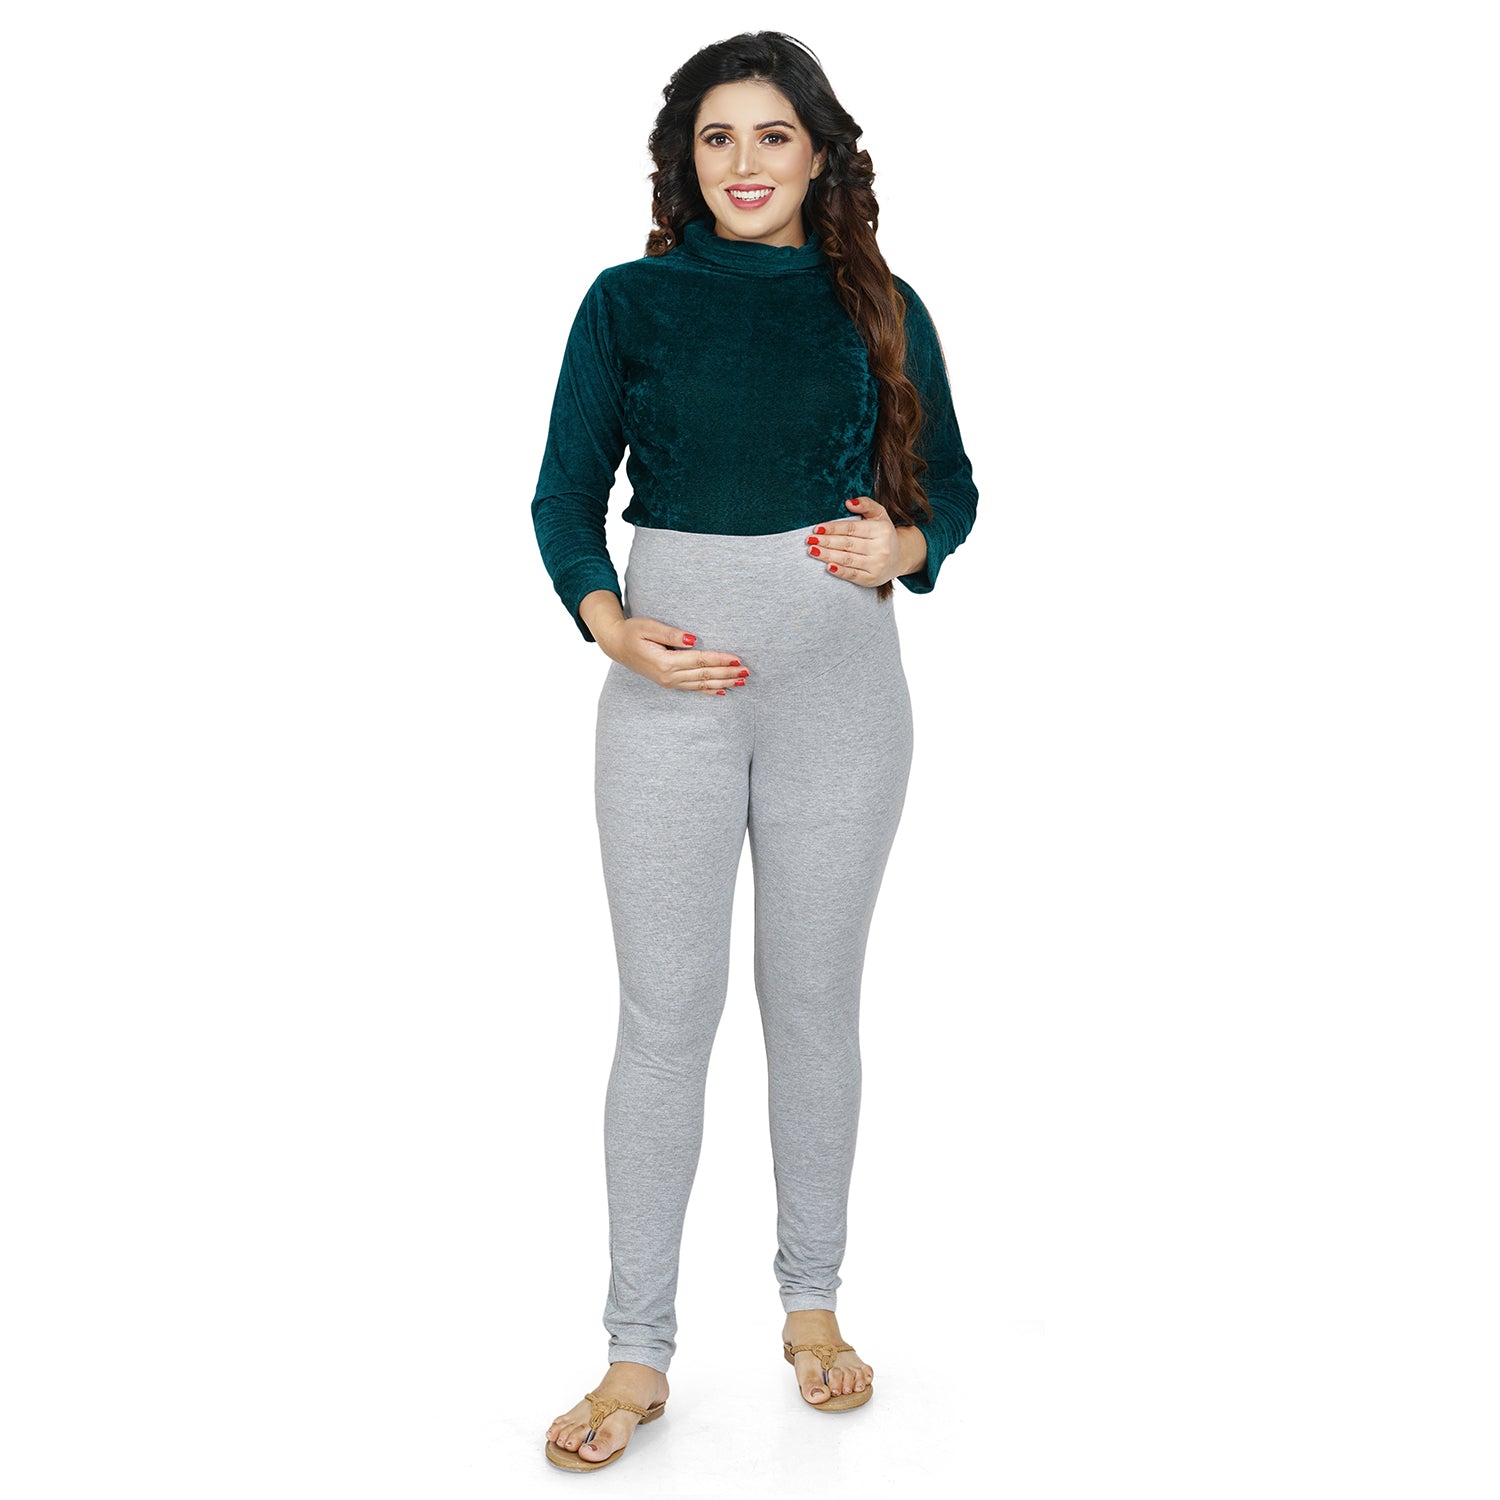 Baby Moo Soft And Comfy Full Length Maternity Leggings Solid - Grey - Baby Moo